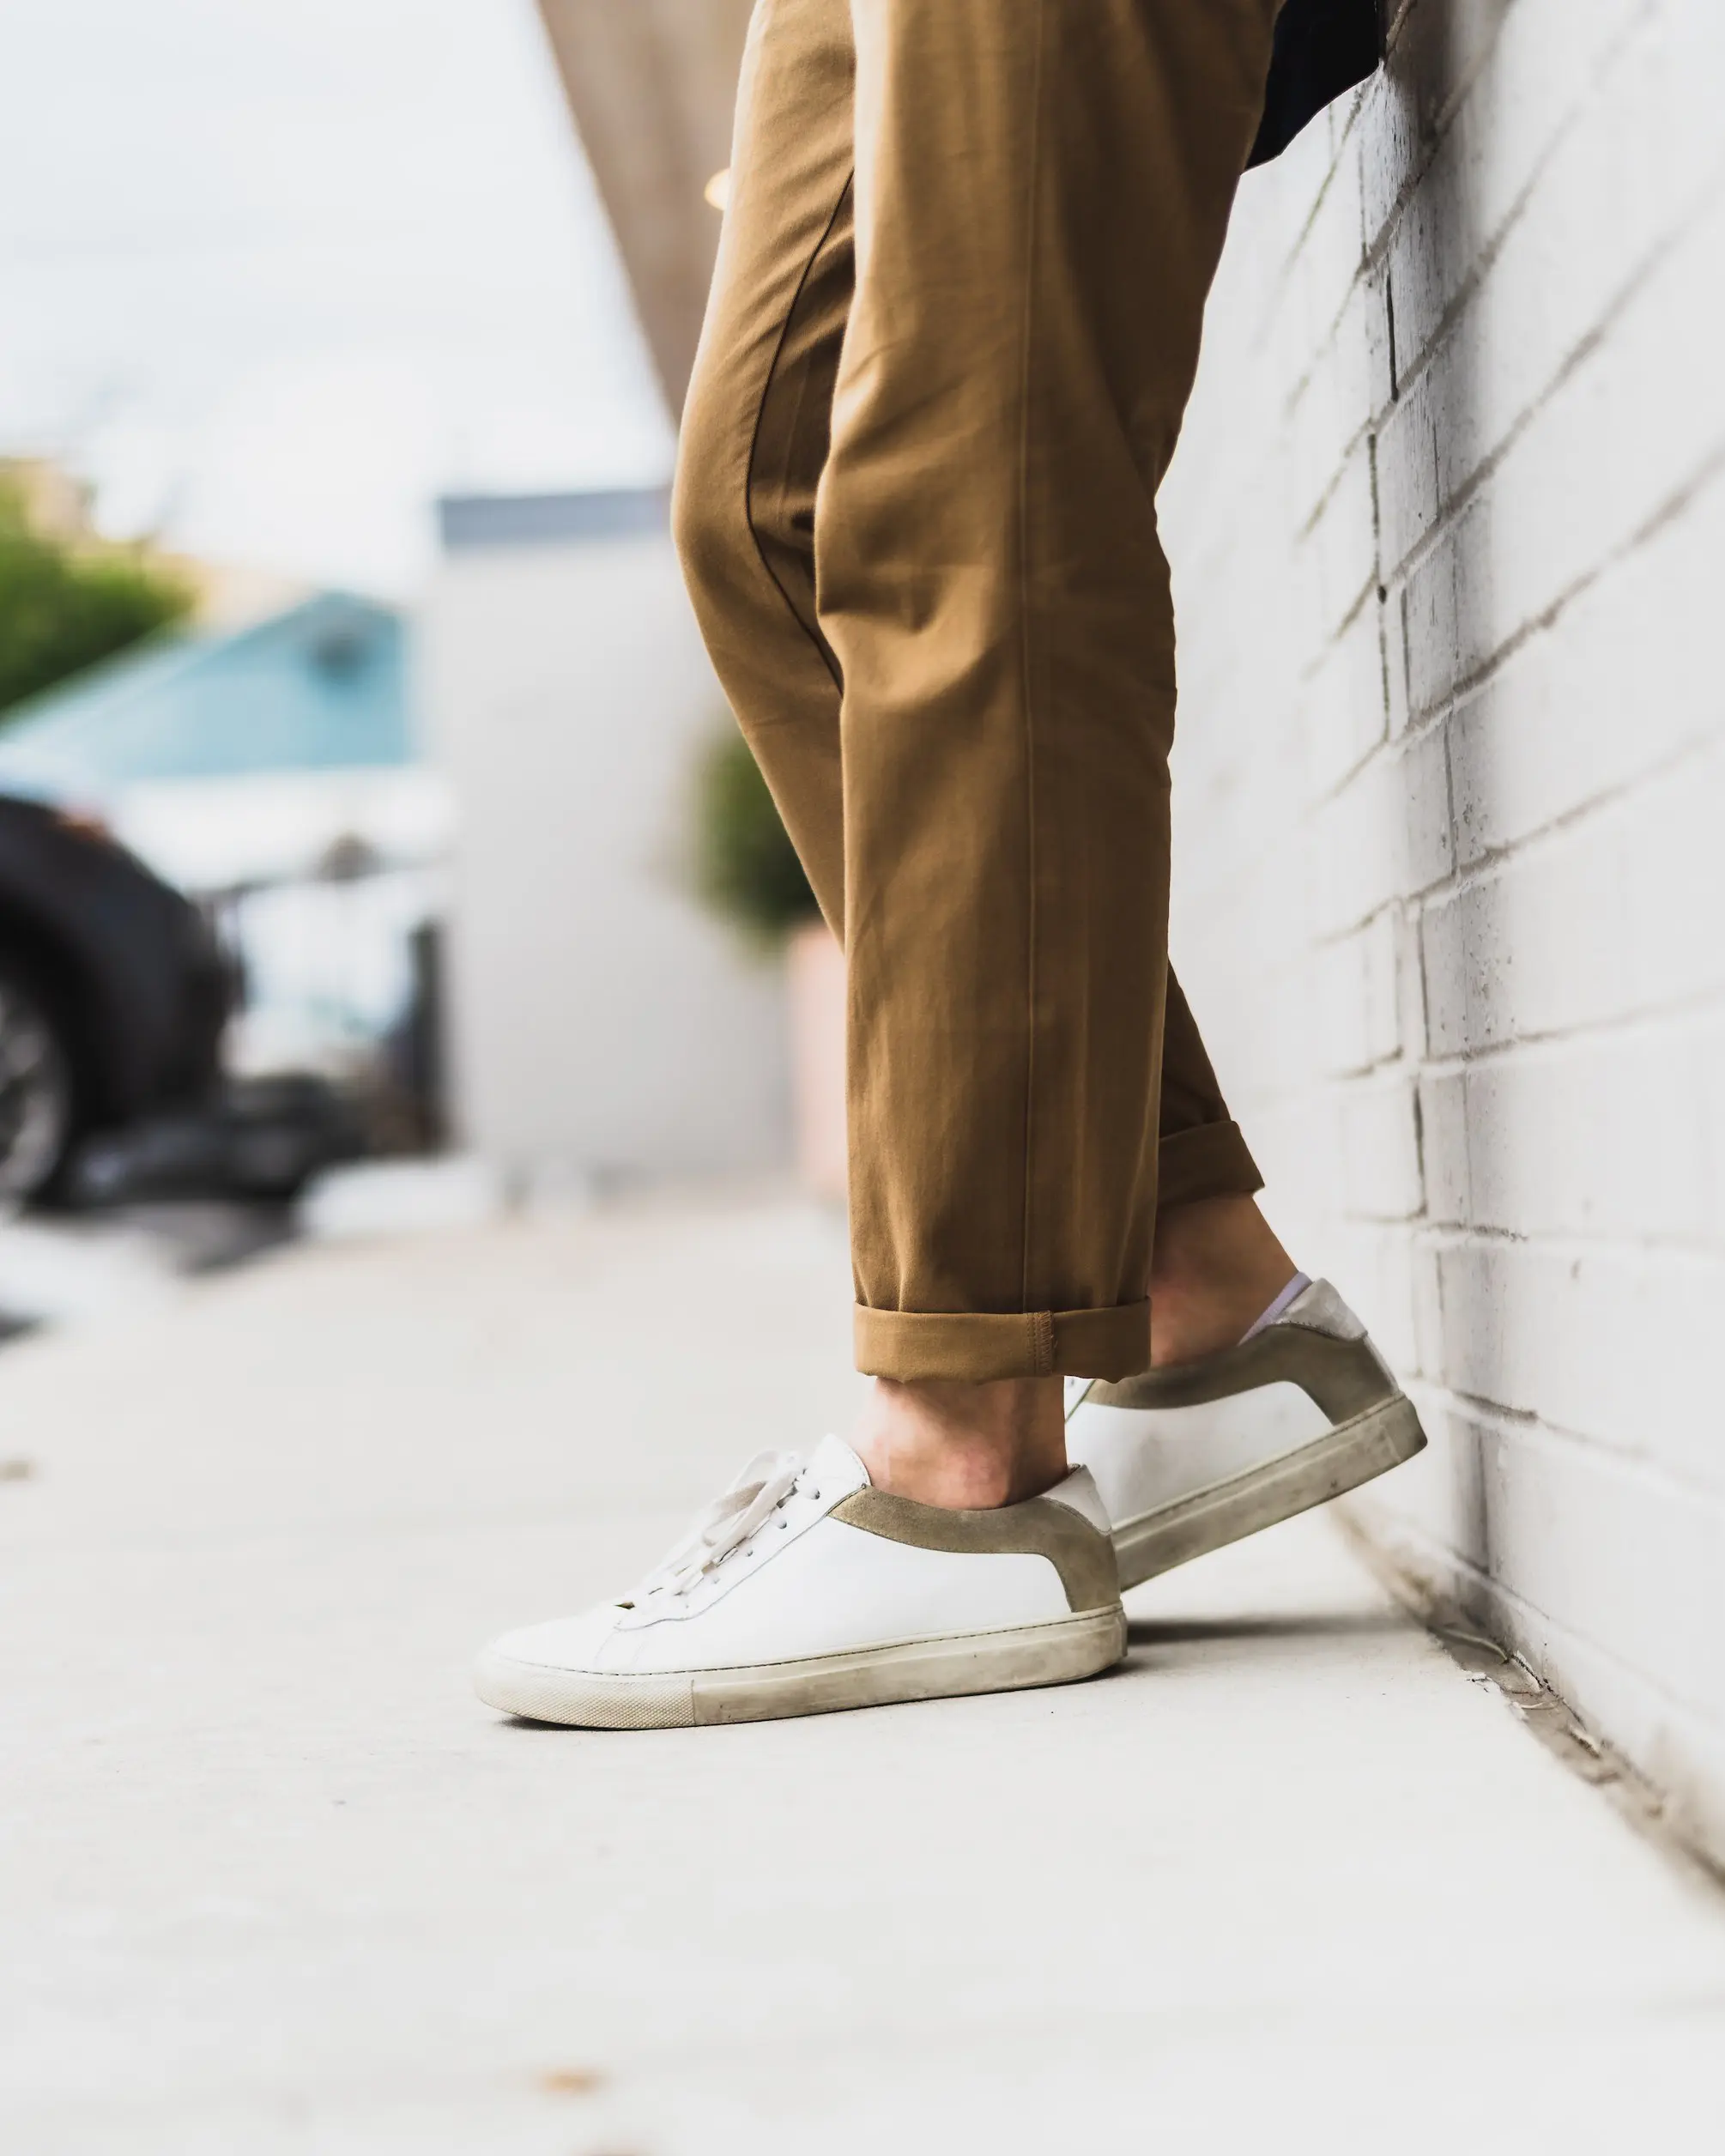 Chinos and white sneakers